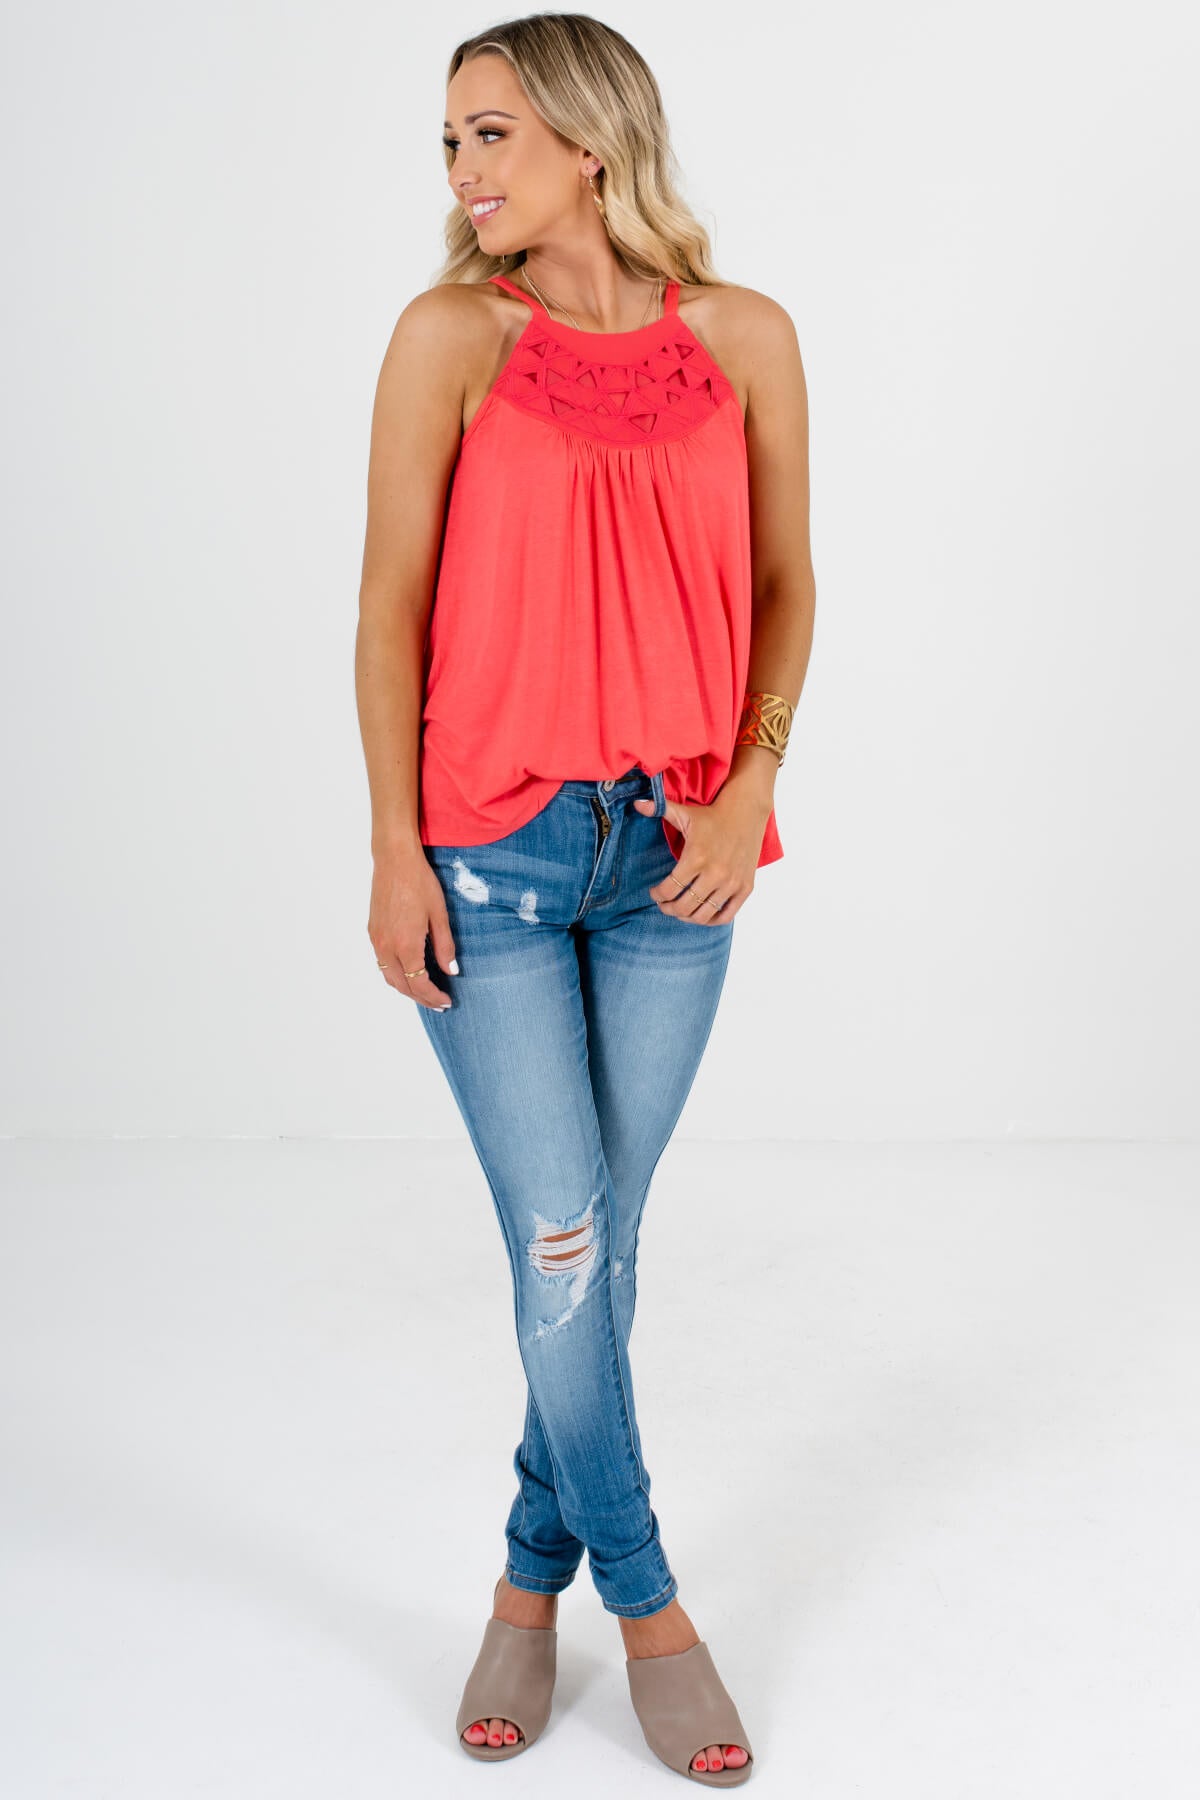 Bright Coral Cutout Halter Tank Tops for Women